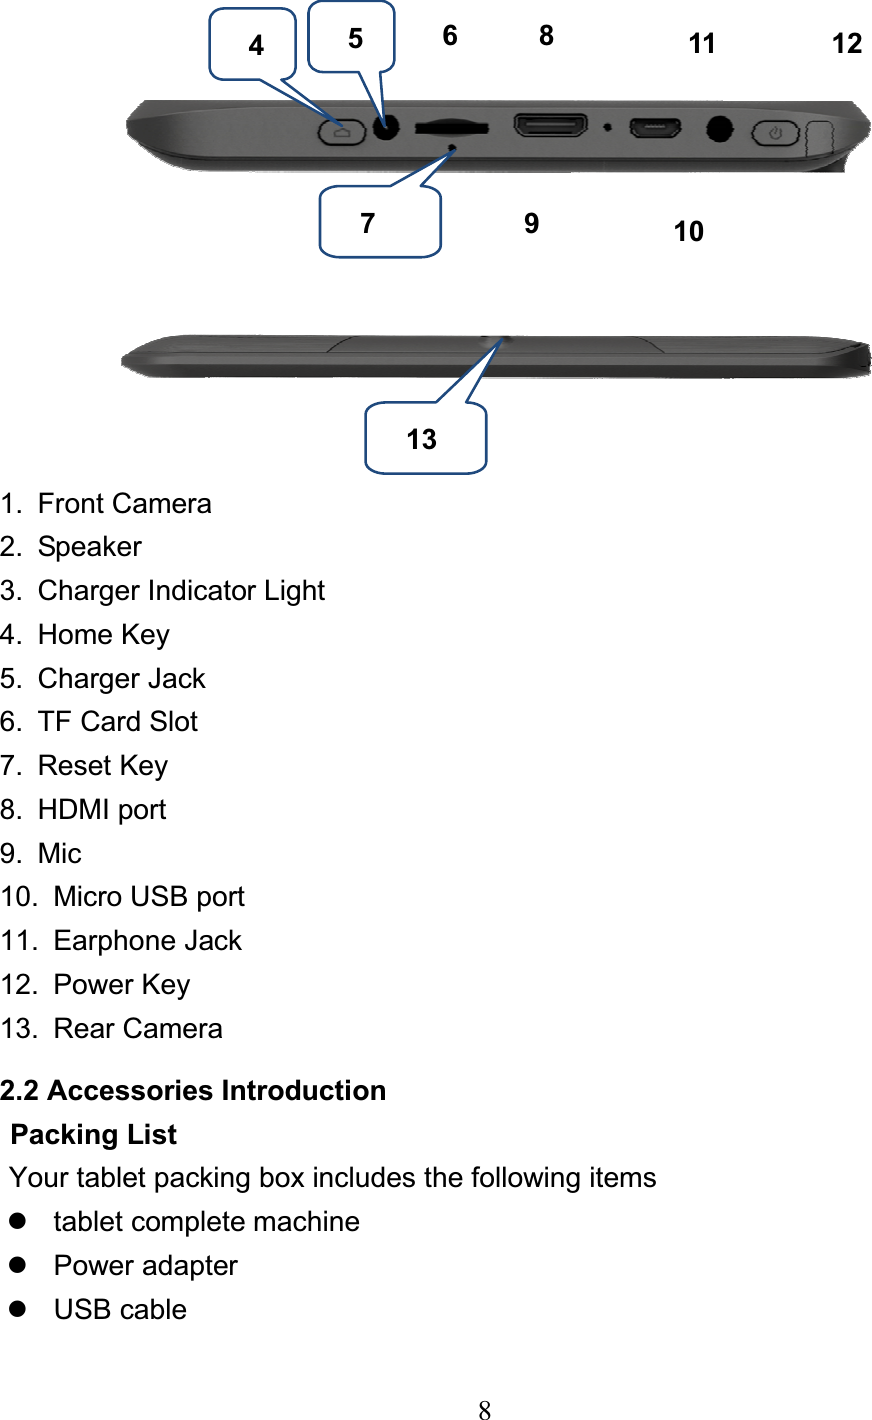 81. Front Camera 2. Speaker 3. Charger Indicator Light 4. Home Key 5. Charger Jack  6. TF Card Slot 7. Reset Key 8. HDMI port 9. Mic 10.  Micro USB port 11. Earphone Jack 12. Power Key 13. Rear Camera  2.2 Accessories Introduction   Packing List Your tablet packing box includes the following items z tablet complete machine z Power adapter z USB cable 45687 9 101311 12 